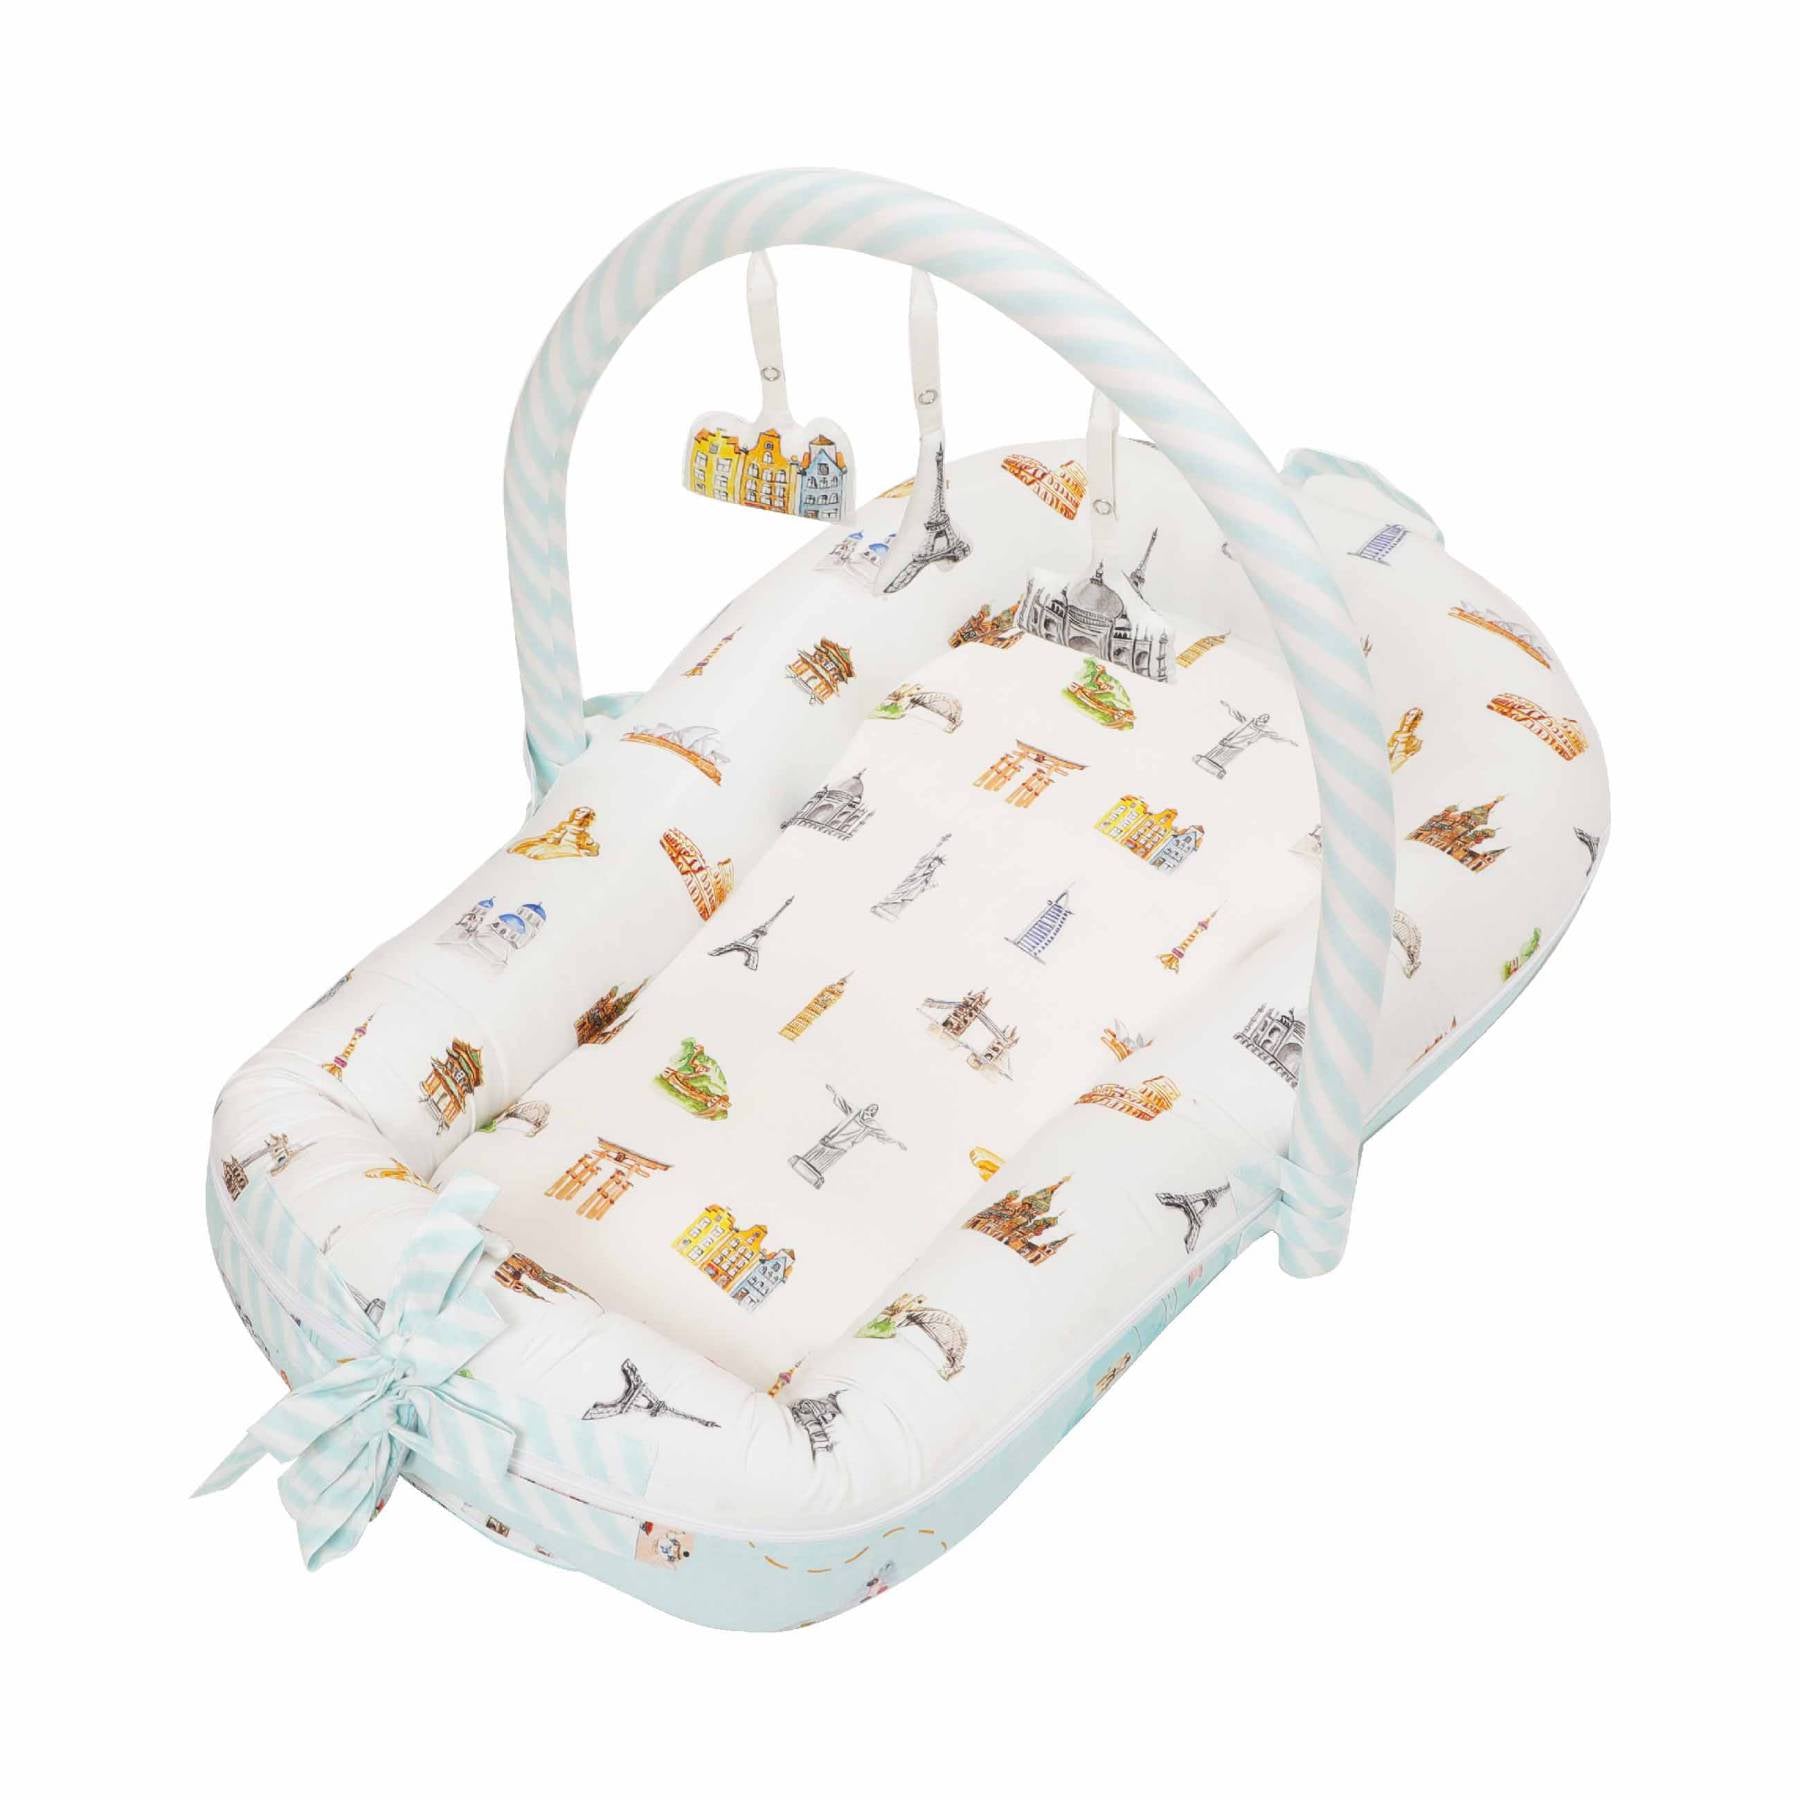 Born To Travel- Snuggly Nest with Attachments